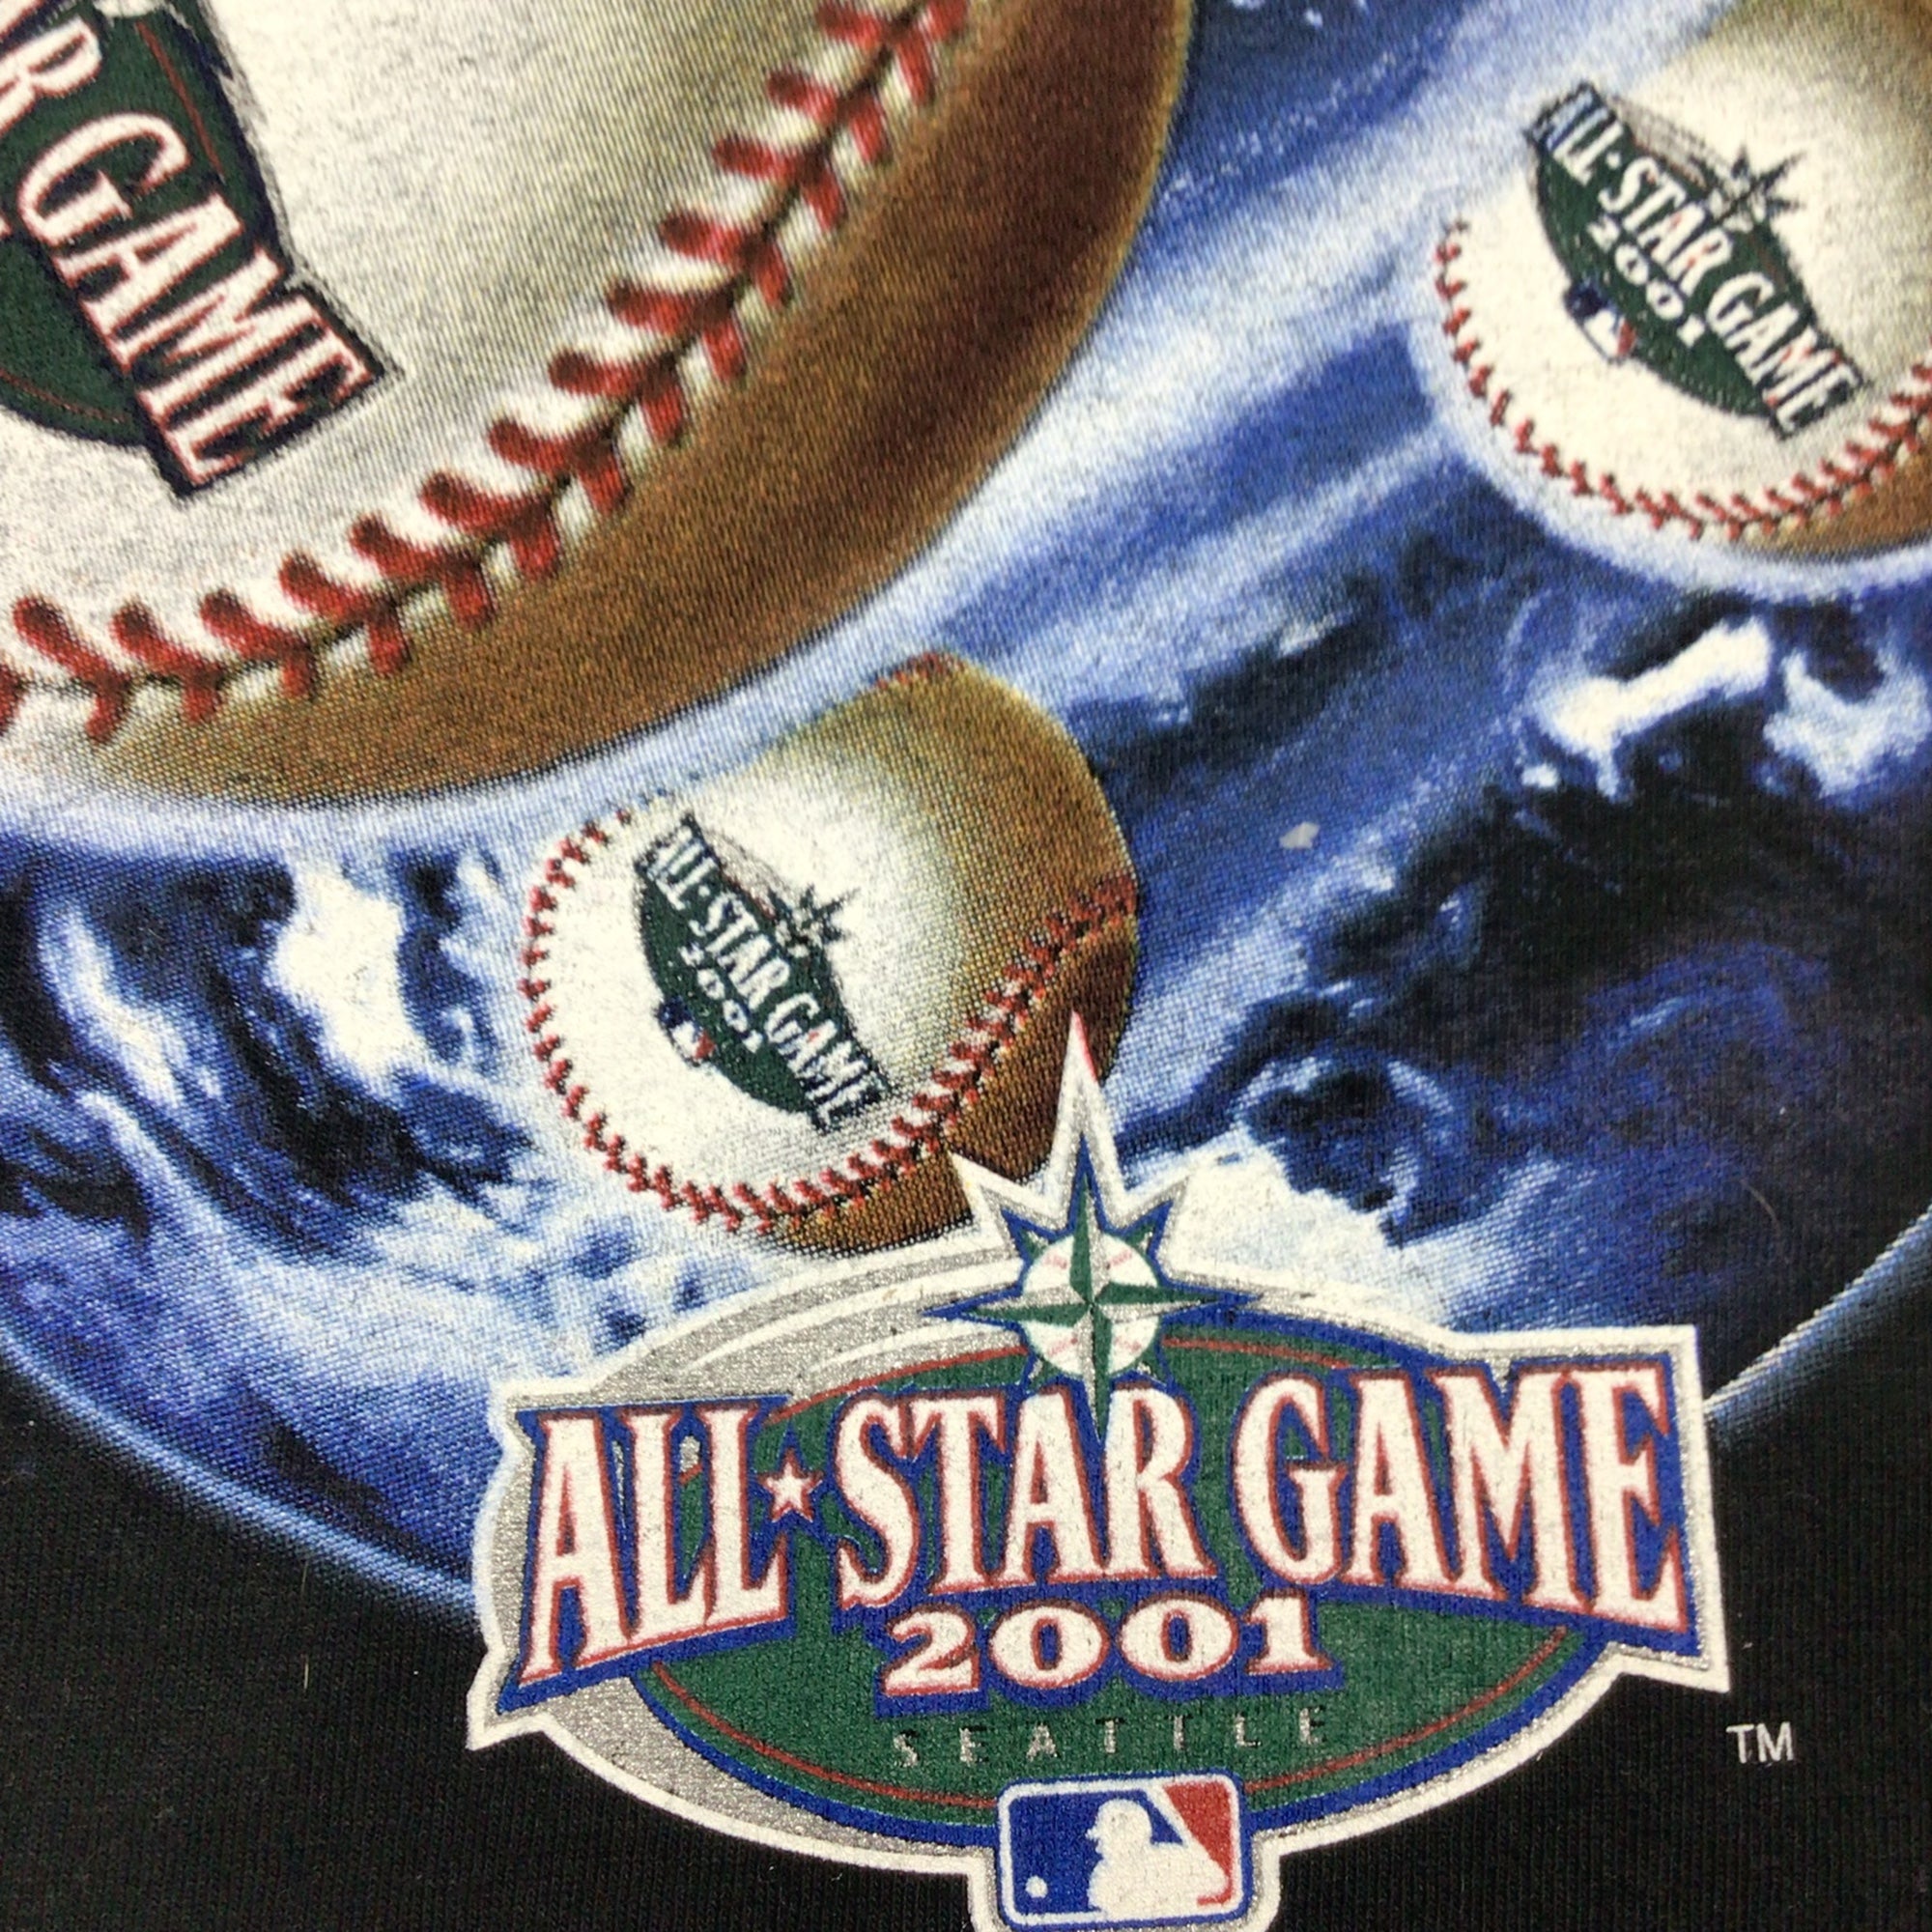 Vintage MLB Seattle Mariners all-star game 2001 T-shirt. Large